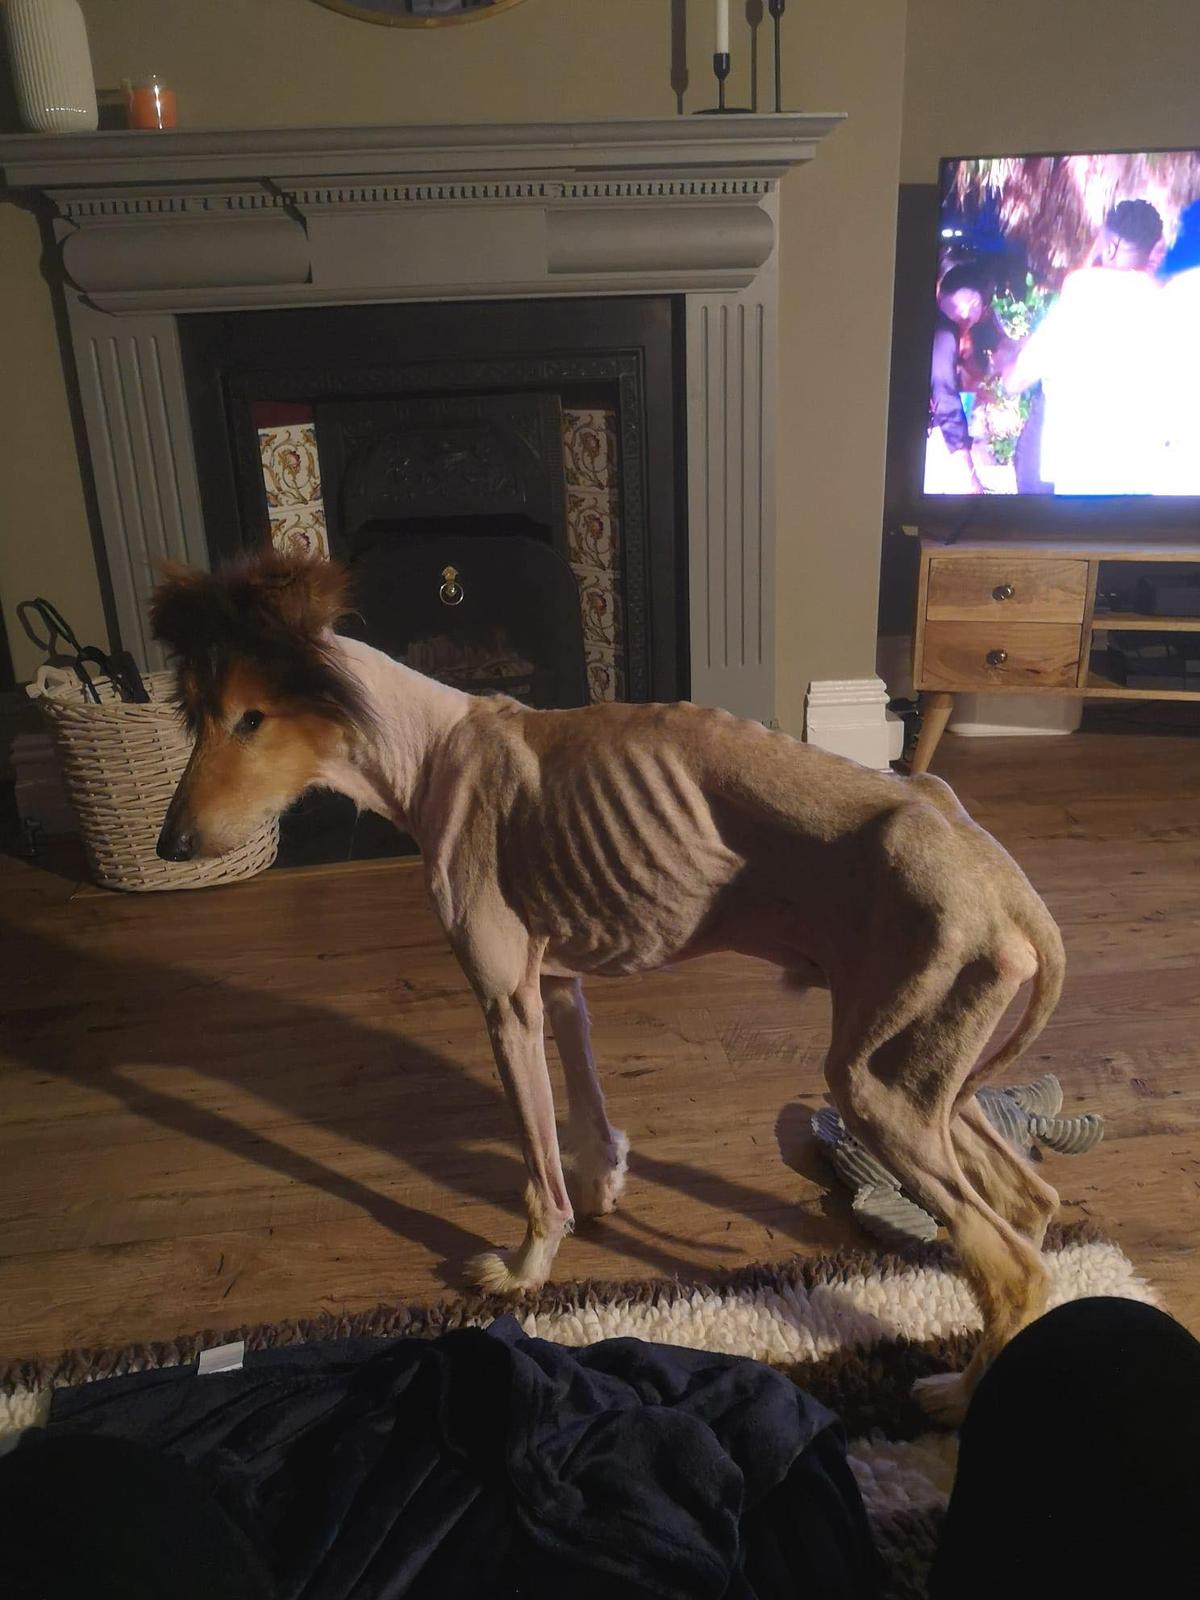 Seb was a 'bag of bones' when he was found. (Courtesy of <a href="https://www.rspca.org.uk/">RSPCA</a>)